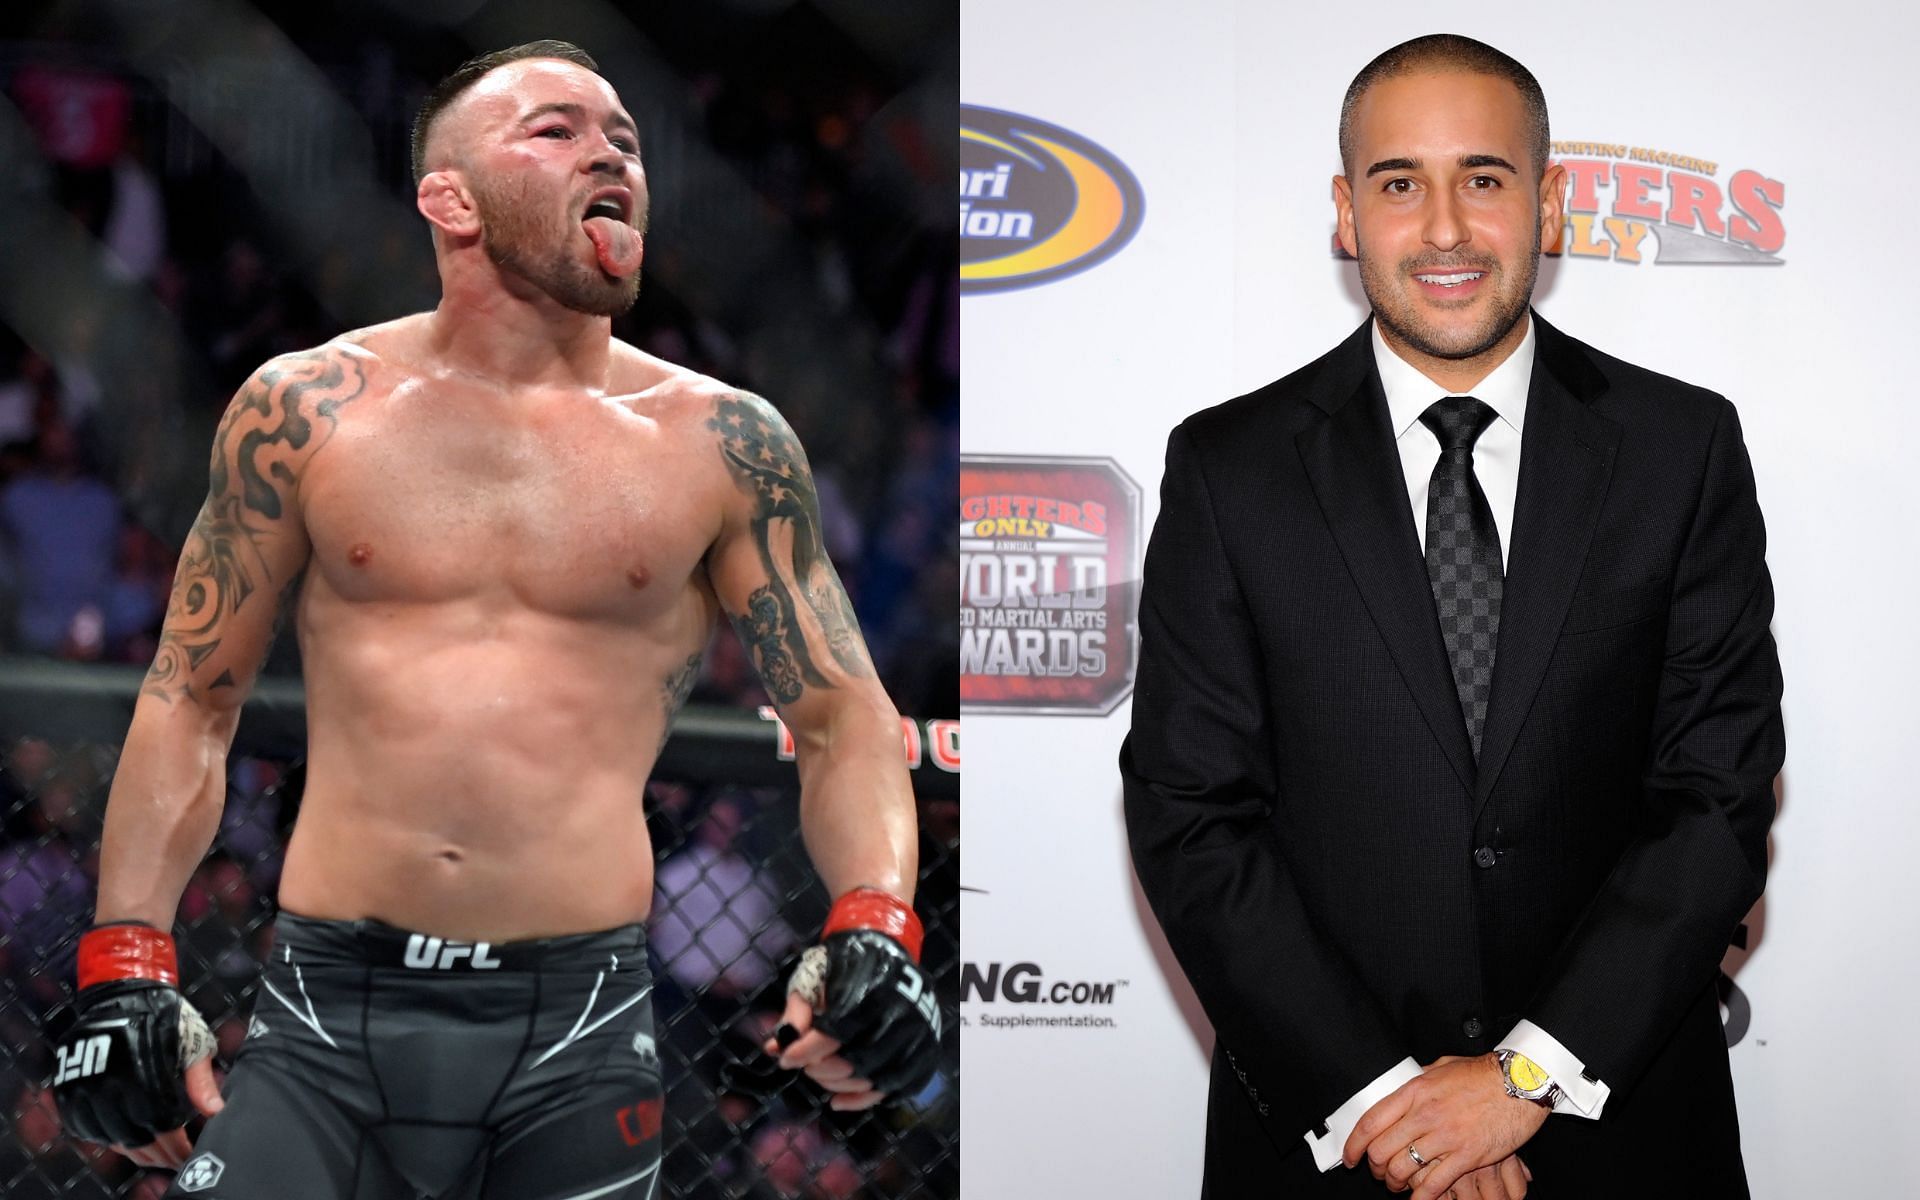 Colby Covington (left) and Jon Anik (right) (Image credits Getty Images)